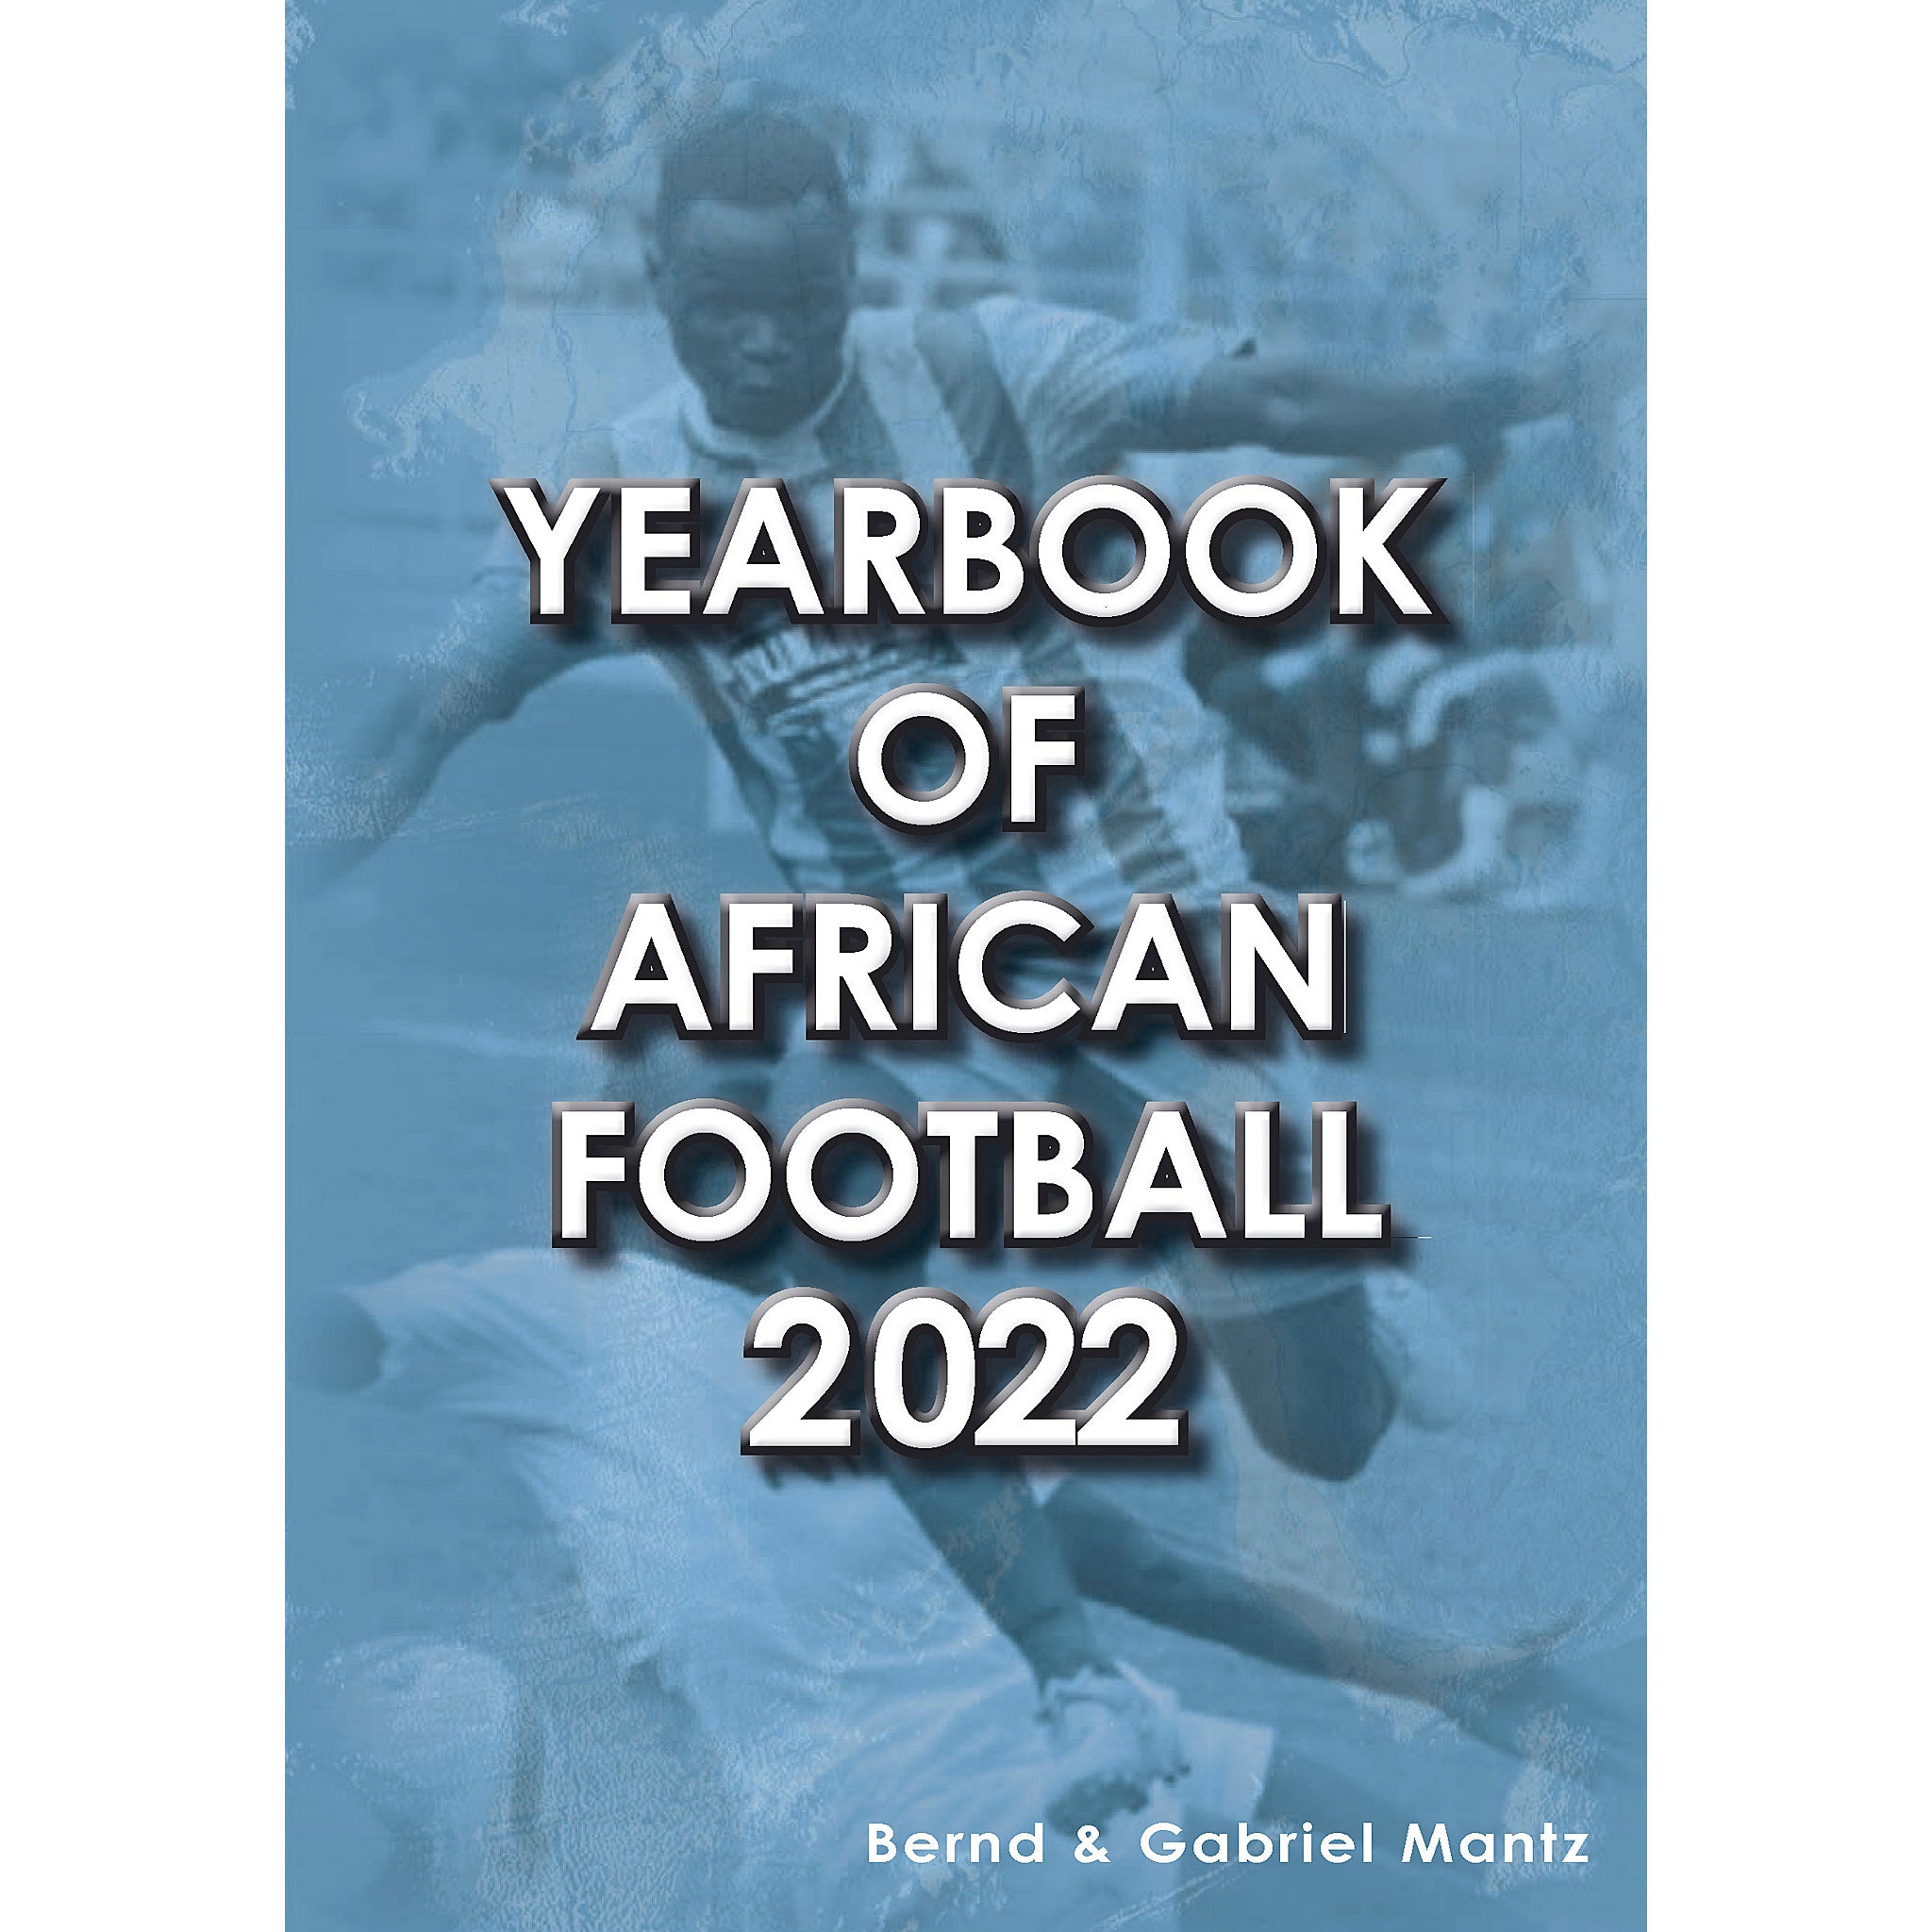 Yearbook of African Football 2022